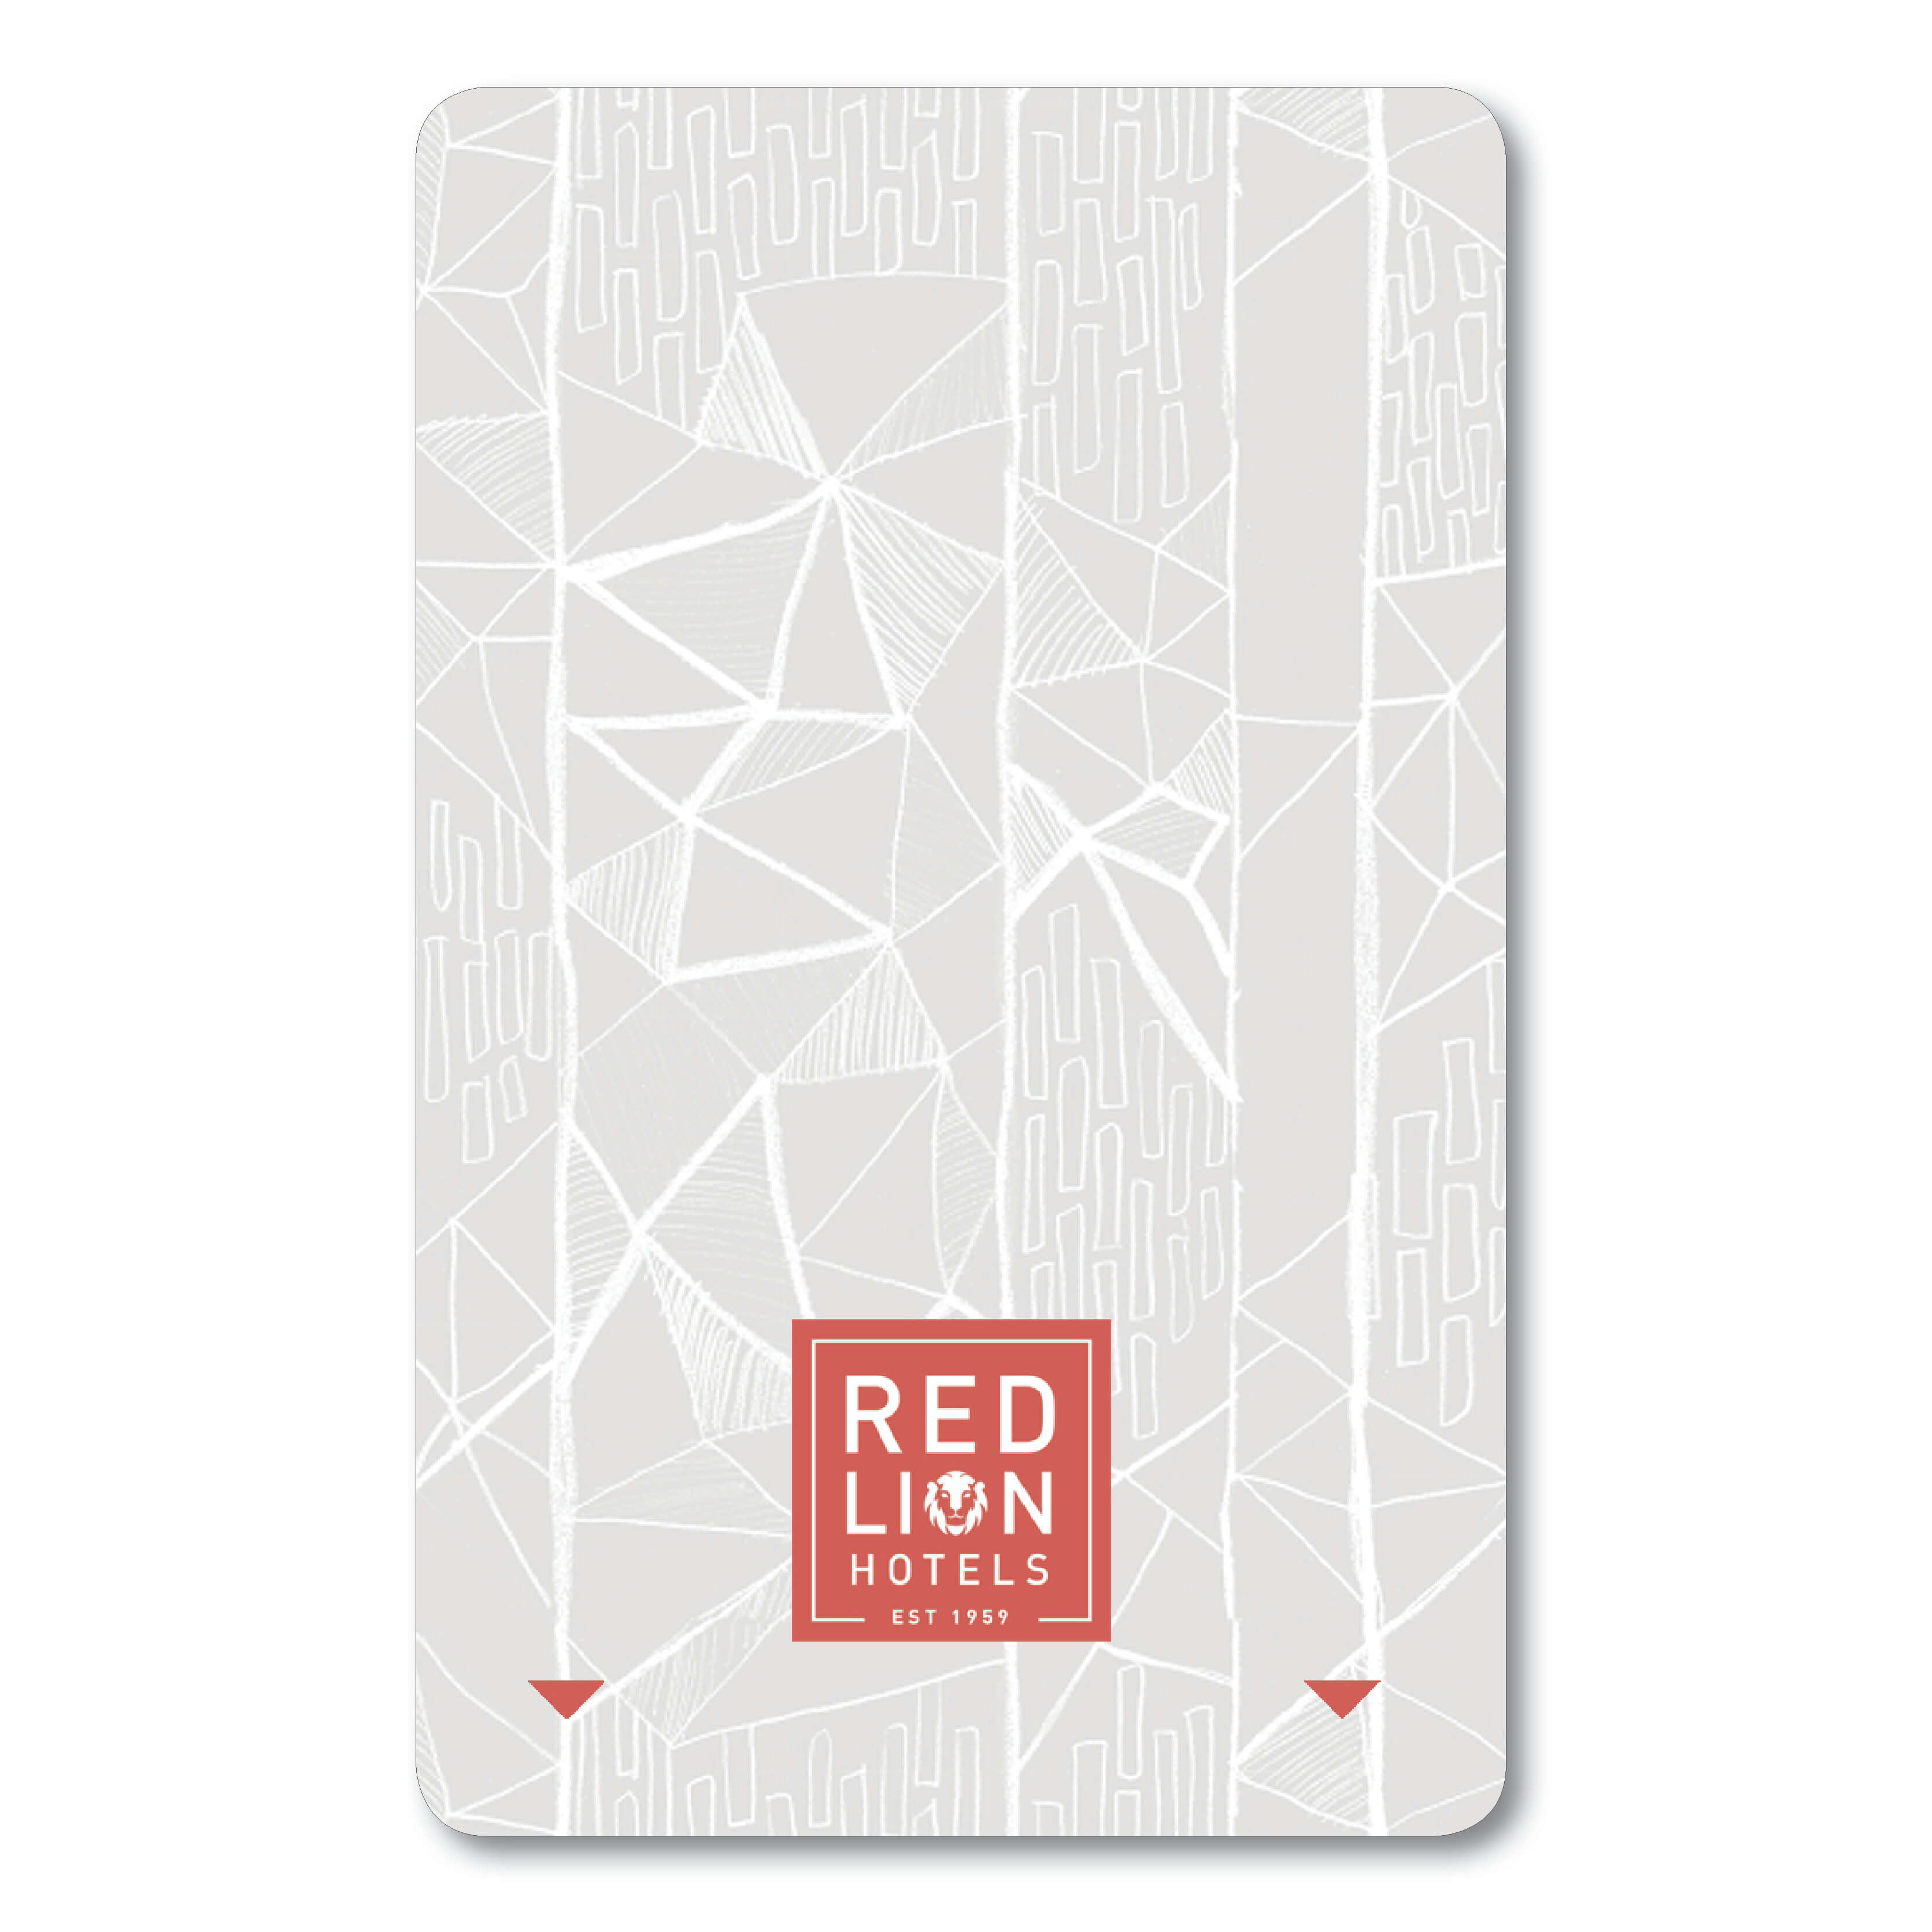 Red Lion Hotels room key card